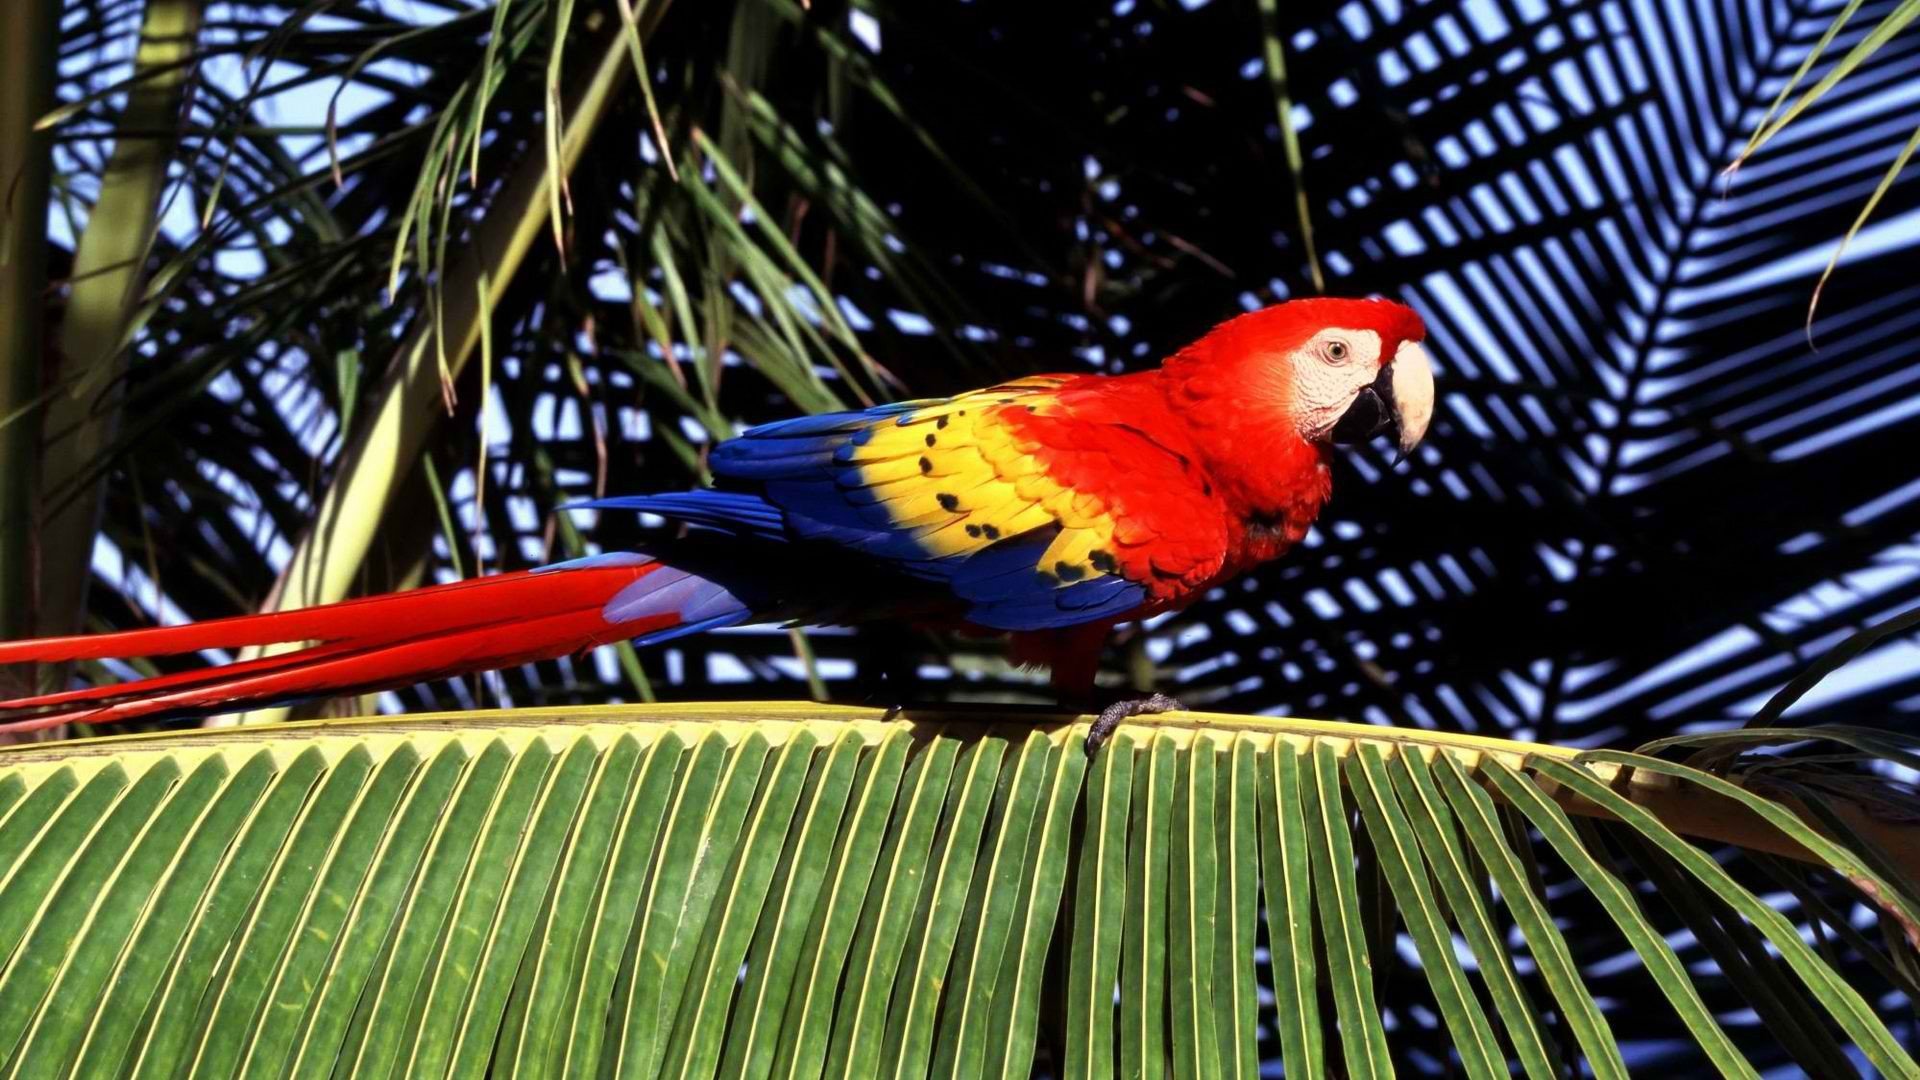 birds, Tropical, Parrots, Scarlet, Macaws, Macaw, Palm, Leaves Wallpaper